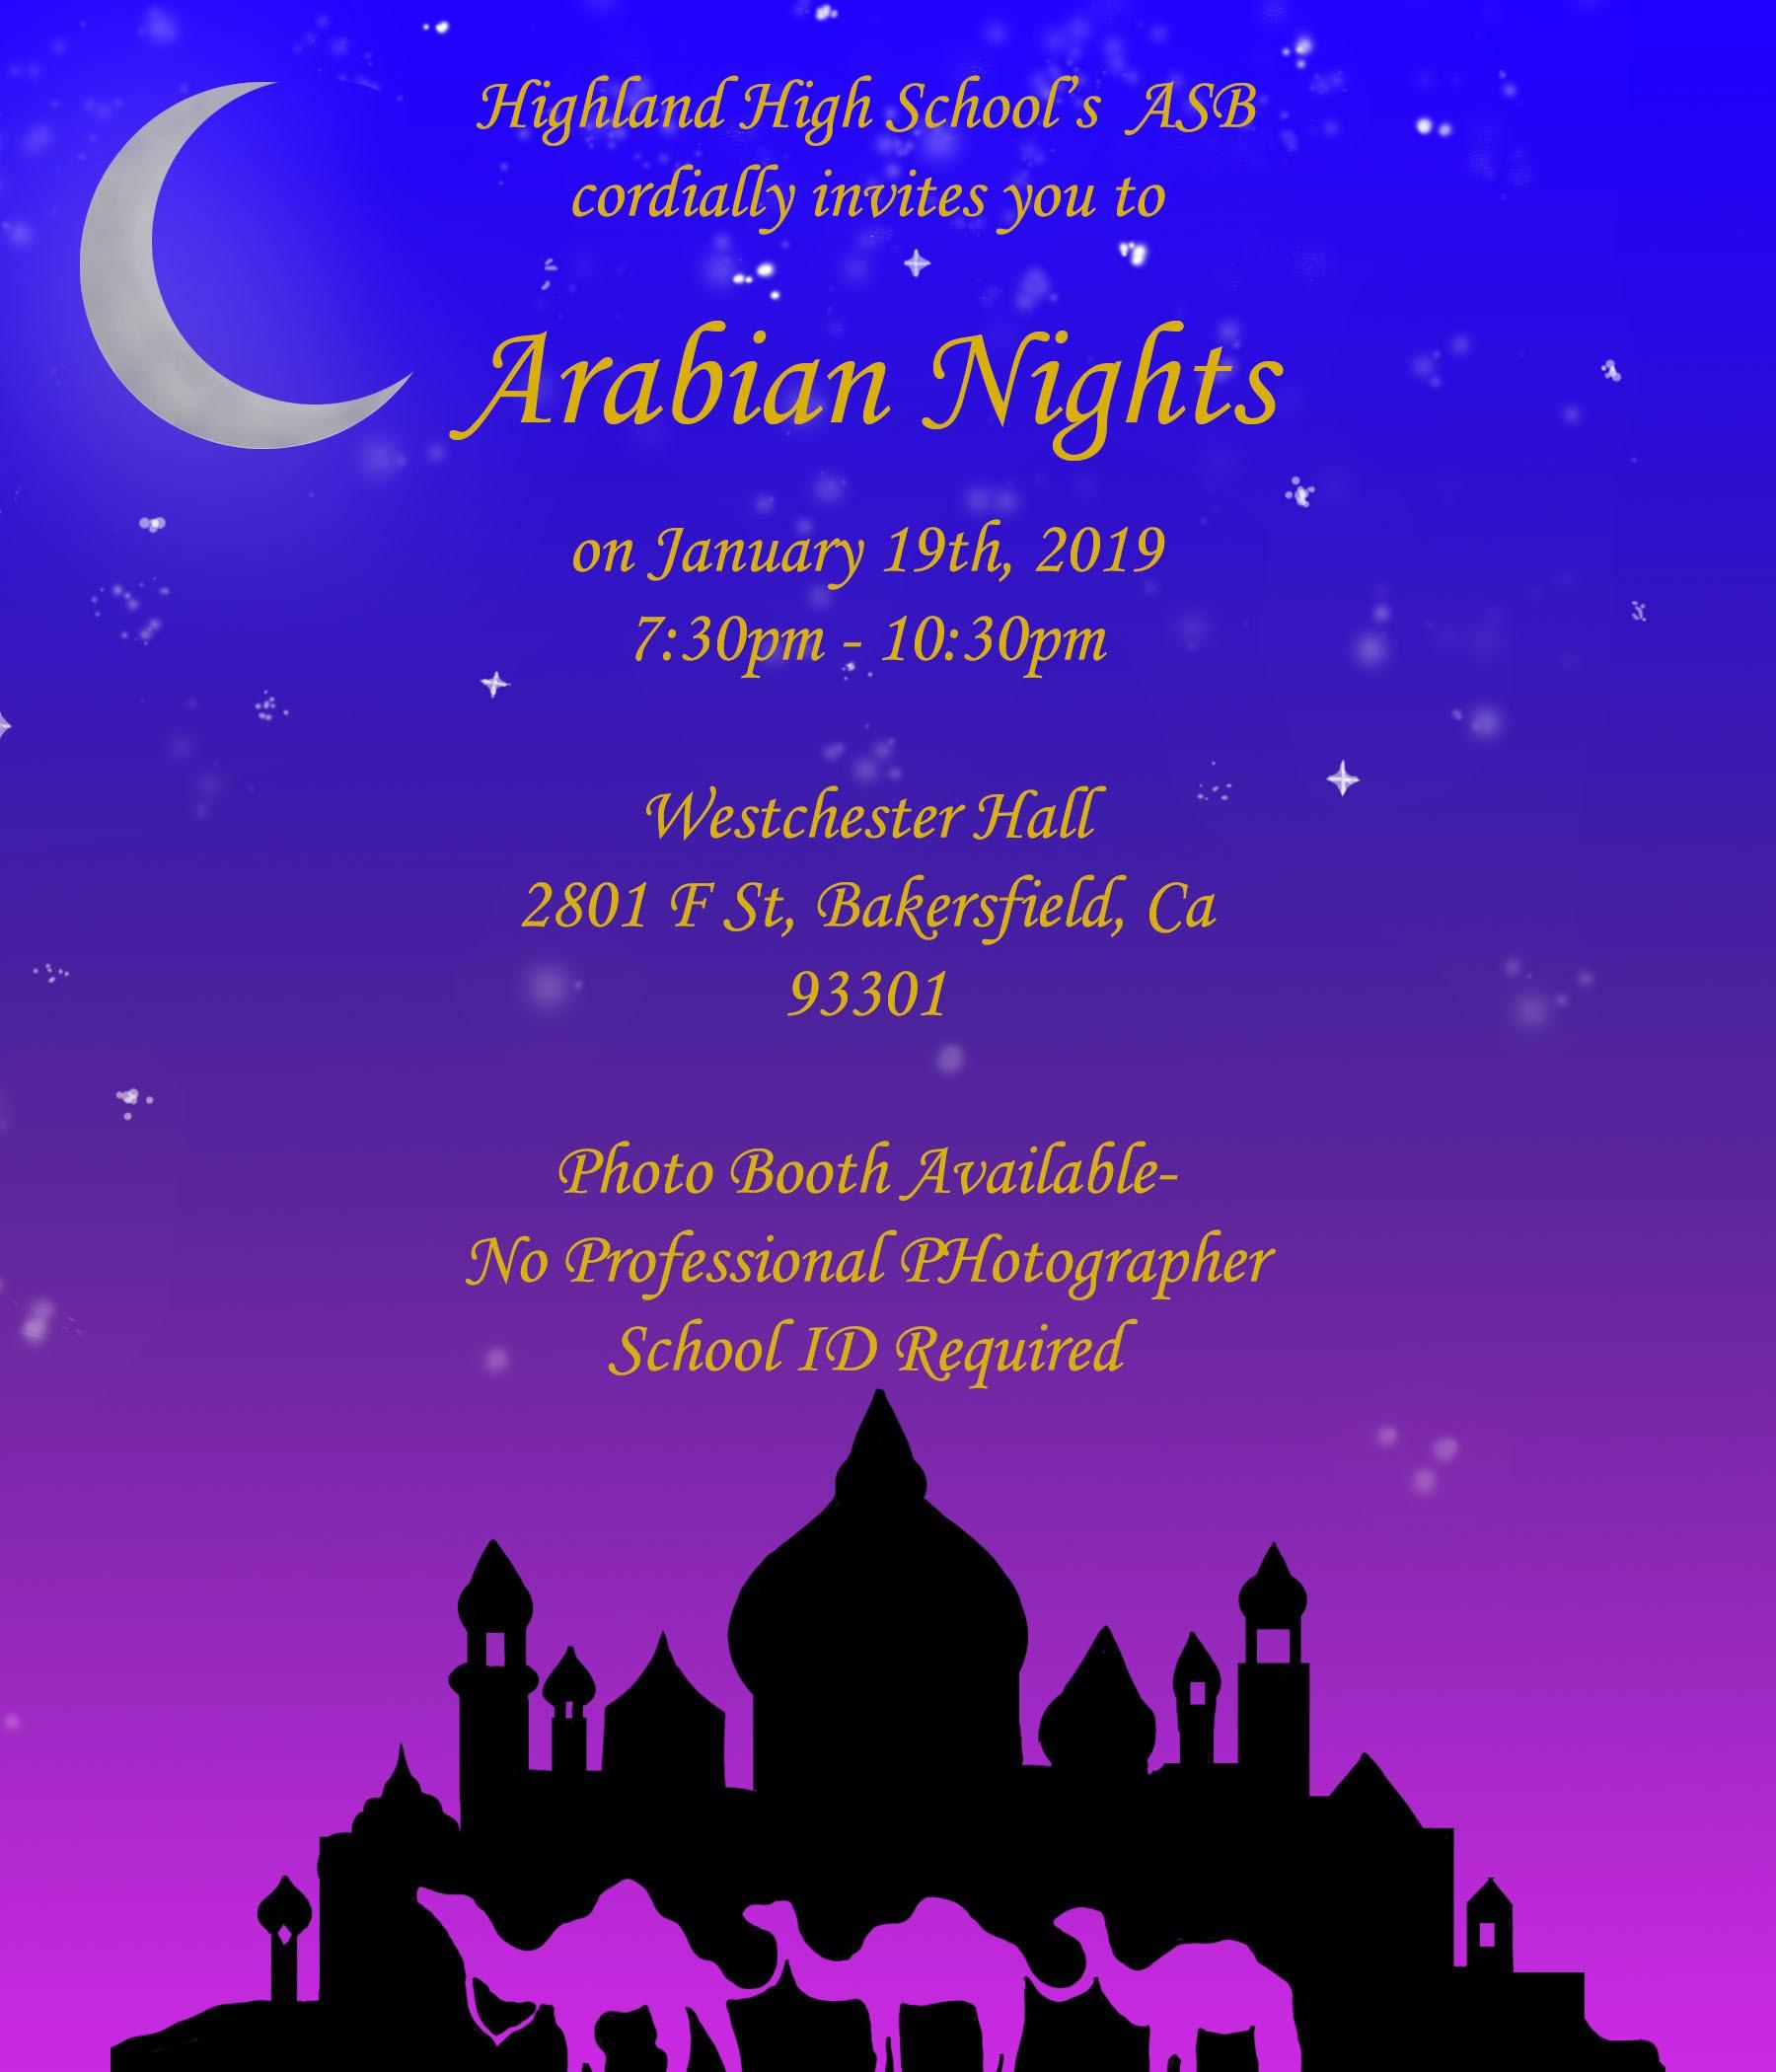 Highland ASB cordially invites you to ... Arabian Nights (this year's Formal)